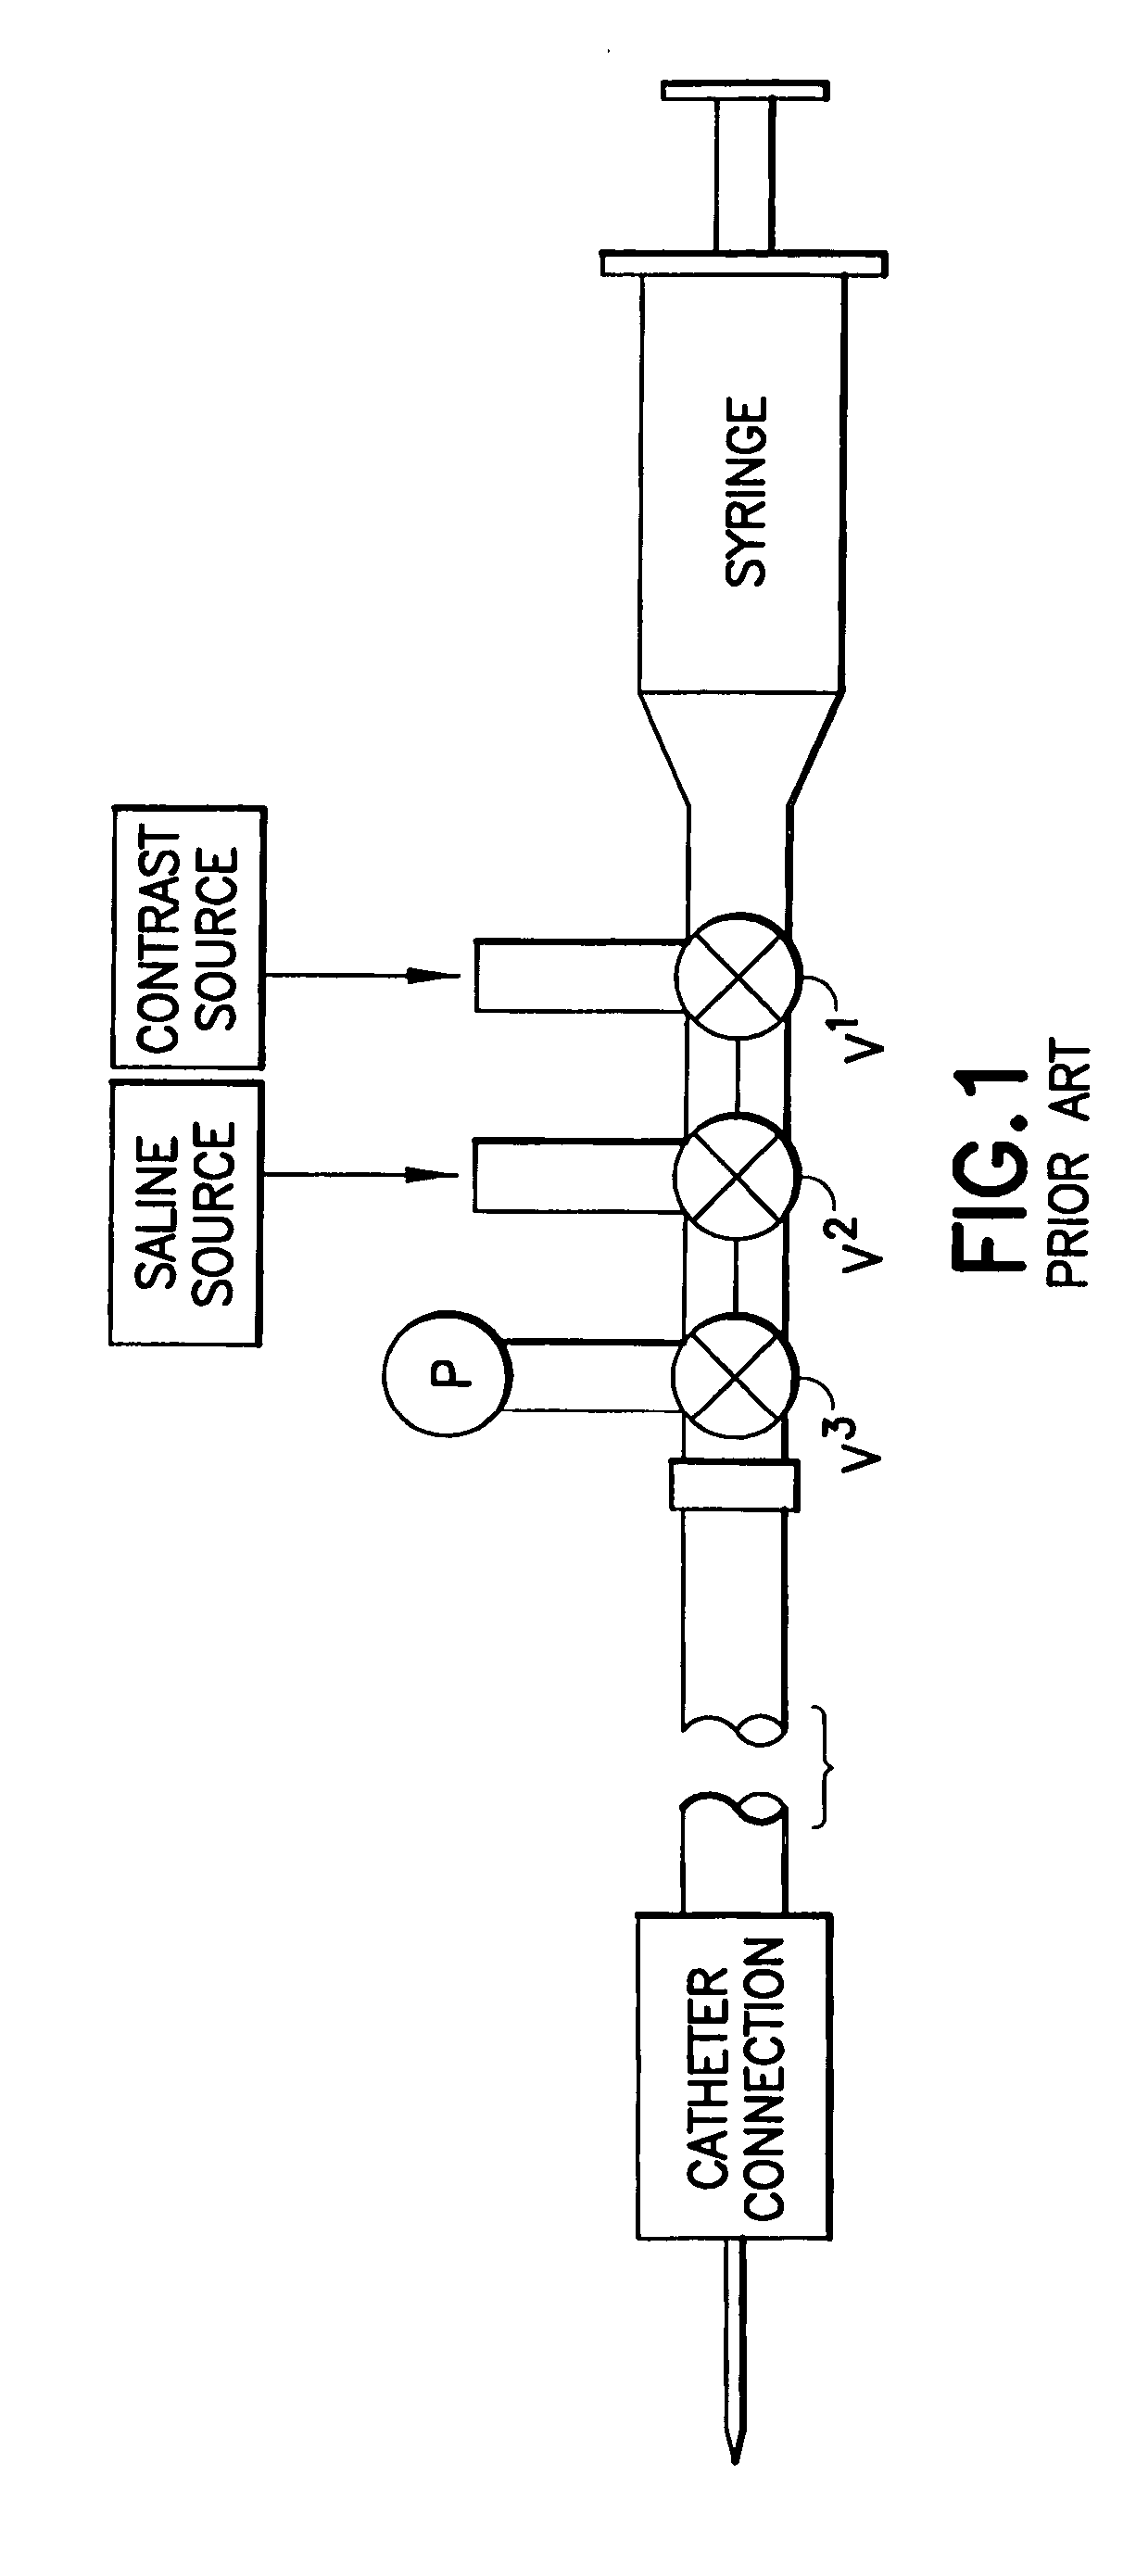 Fluid delivery system, fluid control device, and methods associated with the fluid delivery system and fluid control device